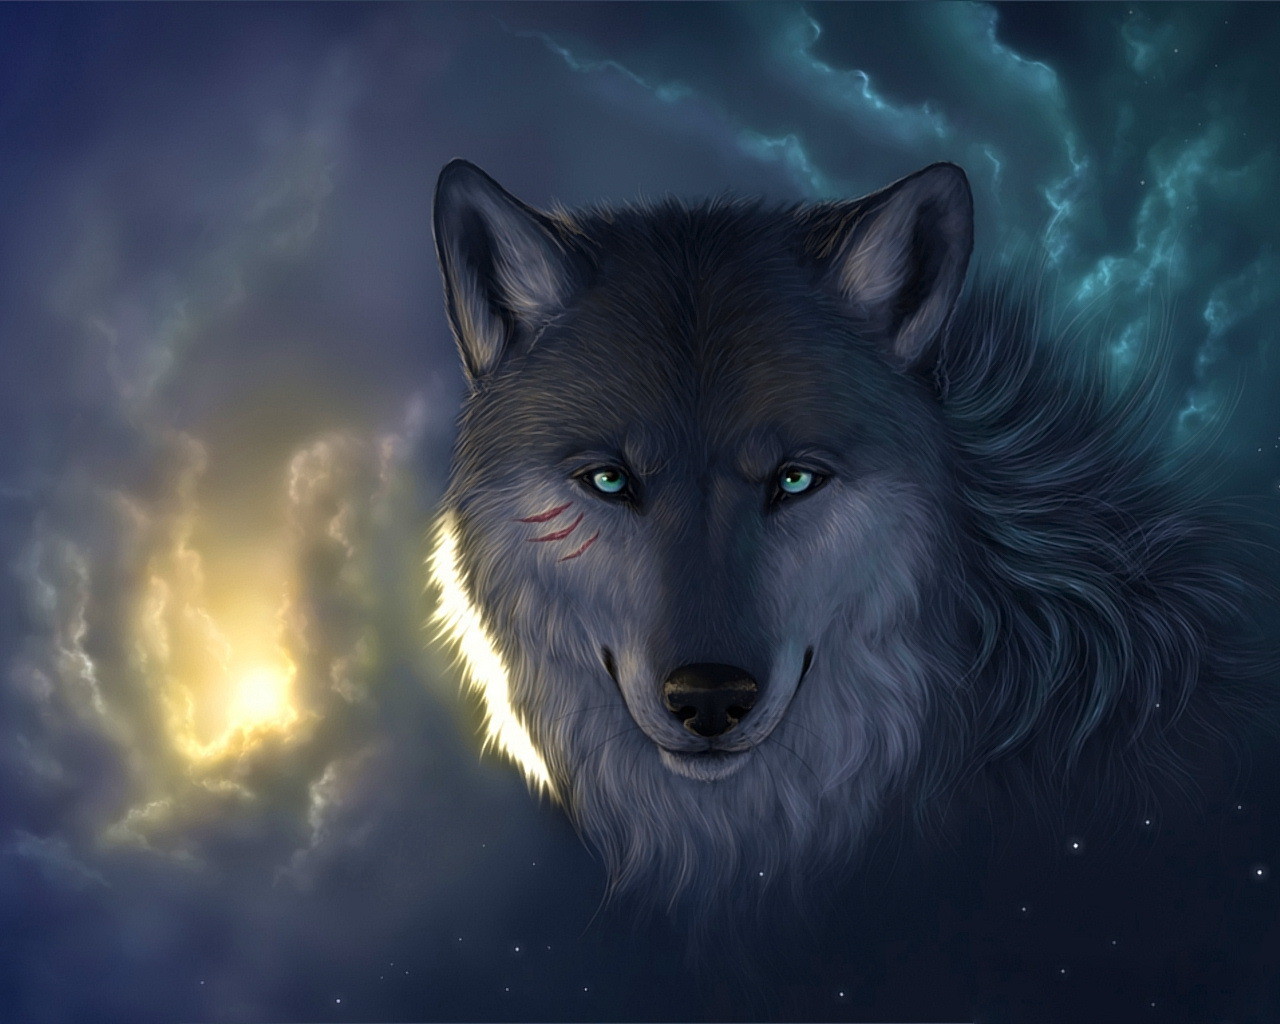 Cool Wolf Backgrounds 10818 Hd Wallpapers in Animals   Imagescicom